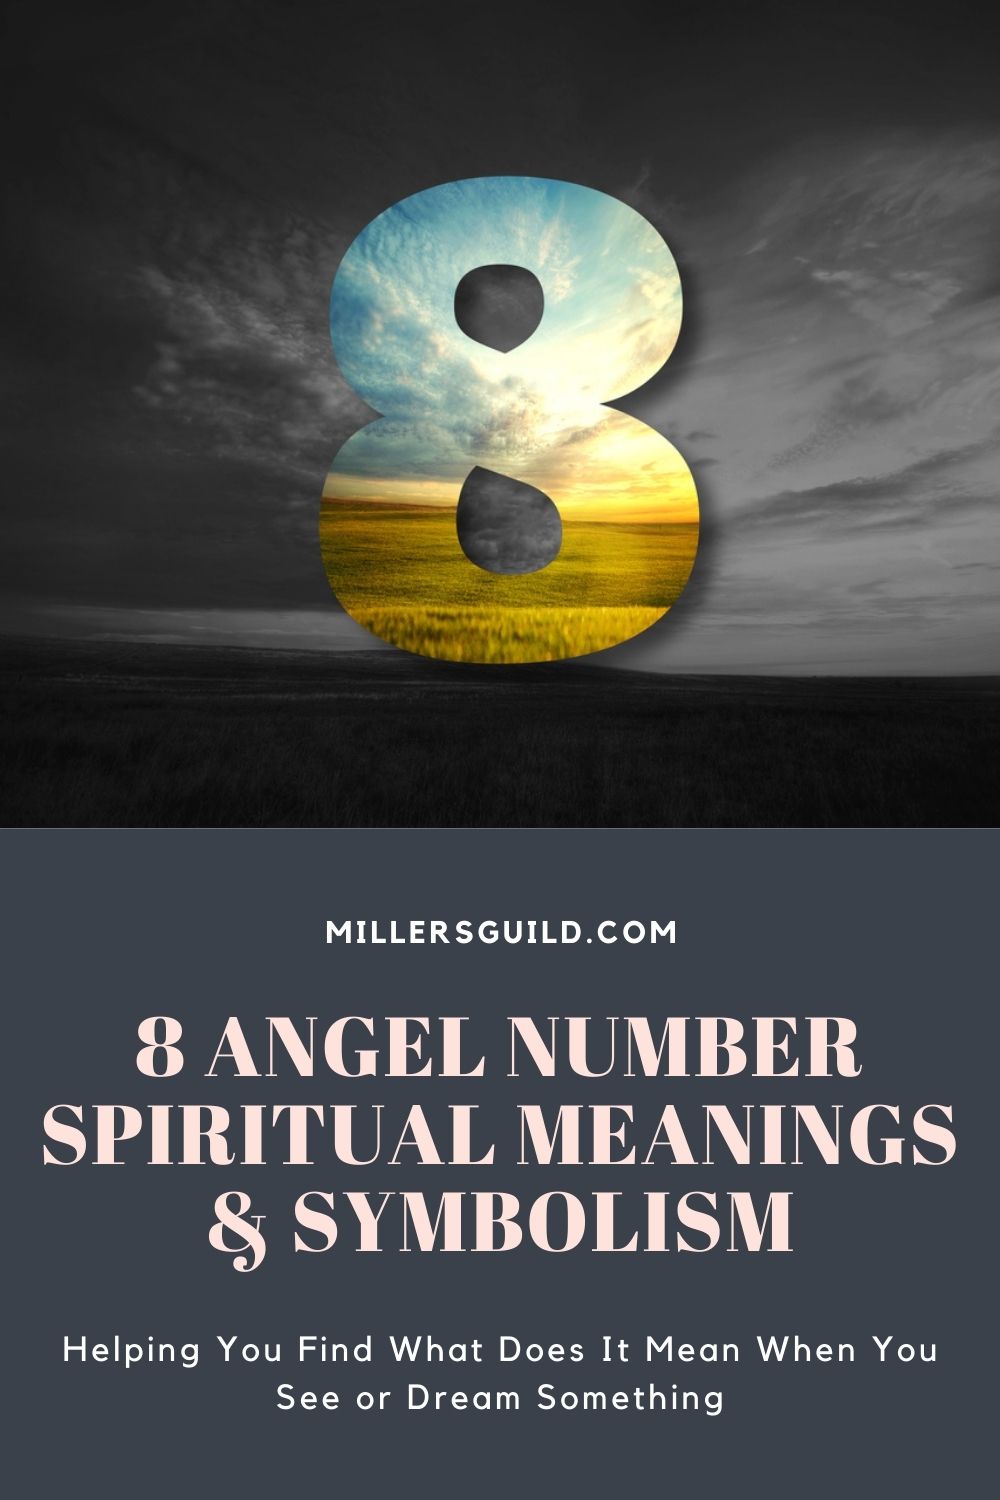 8 Angel Number Spiritual Meanings & Symbolism 2